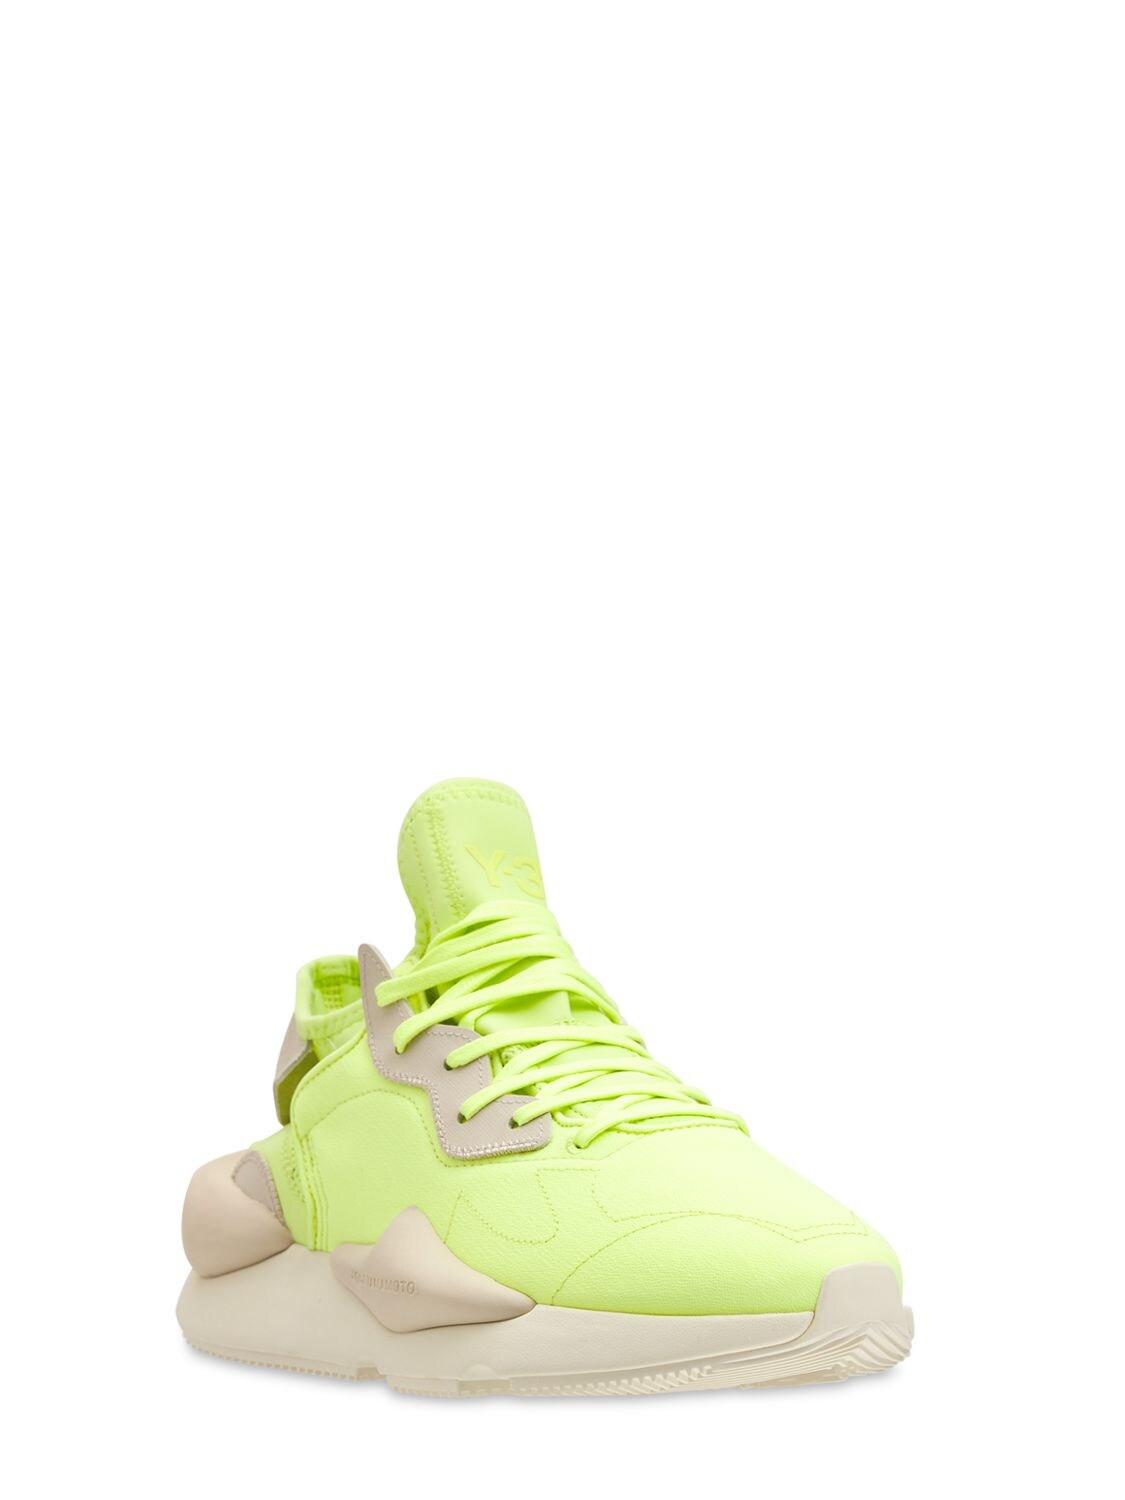 Y-3 Leather Kaiwa Tech Sneakers for Men - Lyst